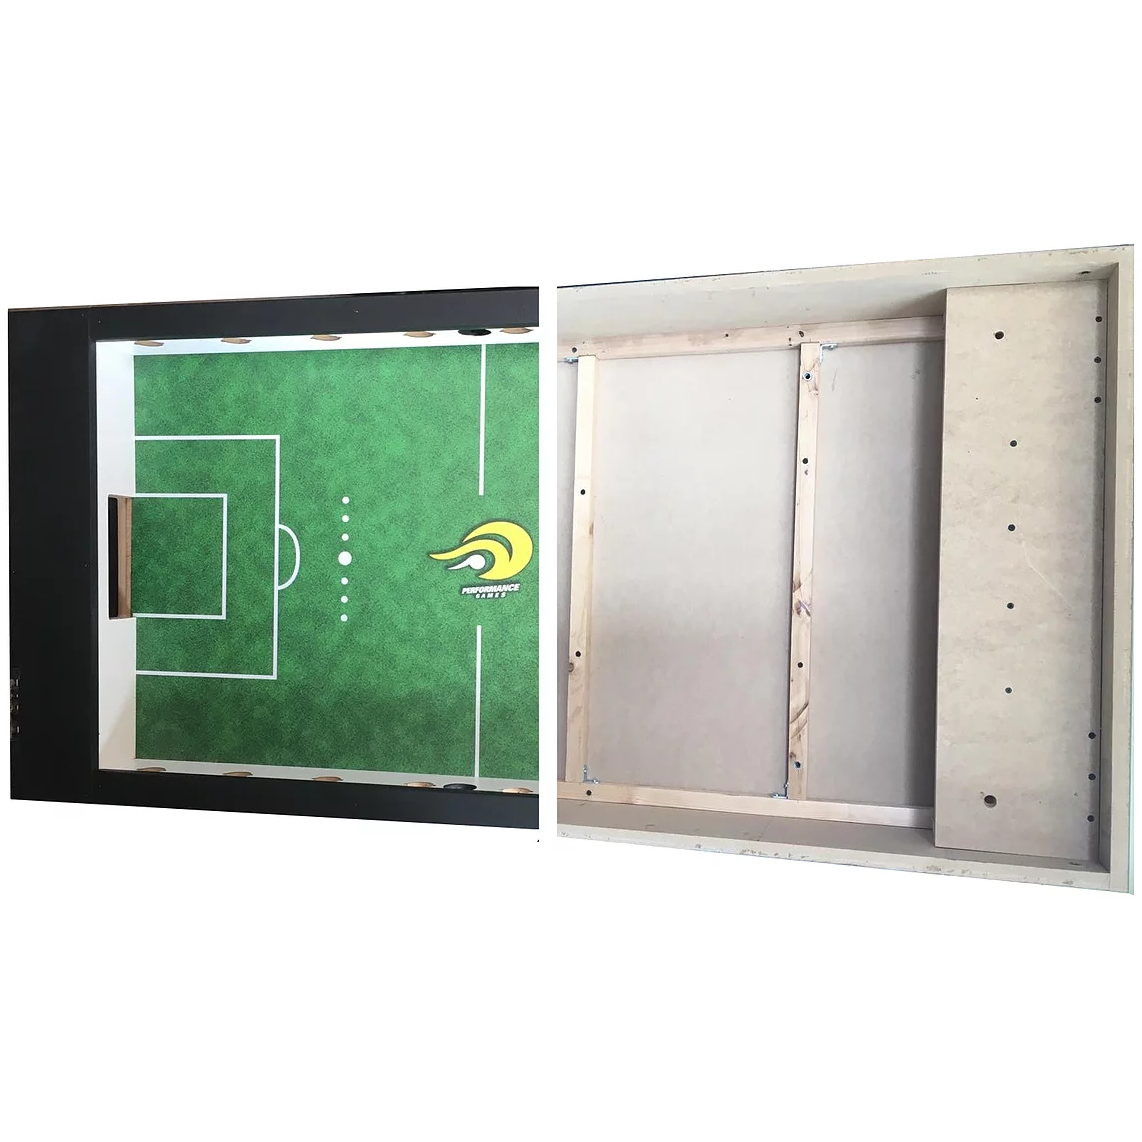 performance games sure shot rv x foosball table view top and bottom of table